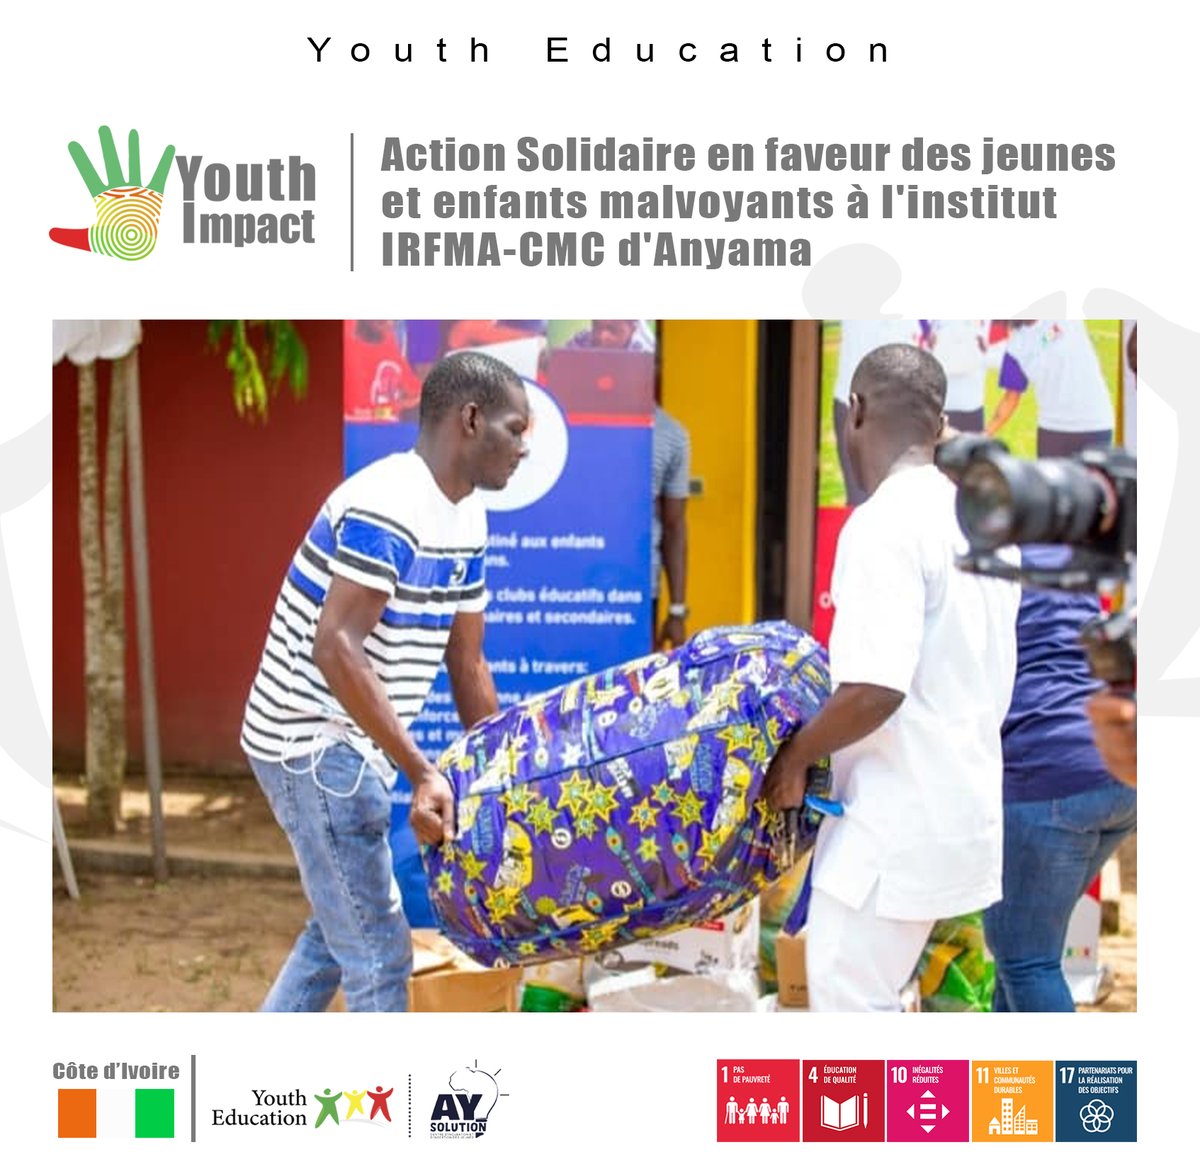 YOUTH IMPACT

The link to this activity :
 urlz.fr/qj8Q

𝗬𝗢𝗨𝗧𝗛 𝗘𝗗𝗨𝗖𝗔𝗧𝗜𝗢𝗡 𝗙𝗢𝗥 𝗔𝗙𝗥𝗜𝗖𝗔
𝗬𝗢𝗨𝗧𝗛 𝗘𝗠𝗣𝗟𝗢𝗬𝗔𝗕𝗜𝗟𝗜𝗧𝗬 𝗜𝗡 𝗔𝗙𝗥𝗜𝗖𝗔
#YouthEducation #YouthImpact #EngagementCitoyen #inclusion #Solidarité #handicap